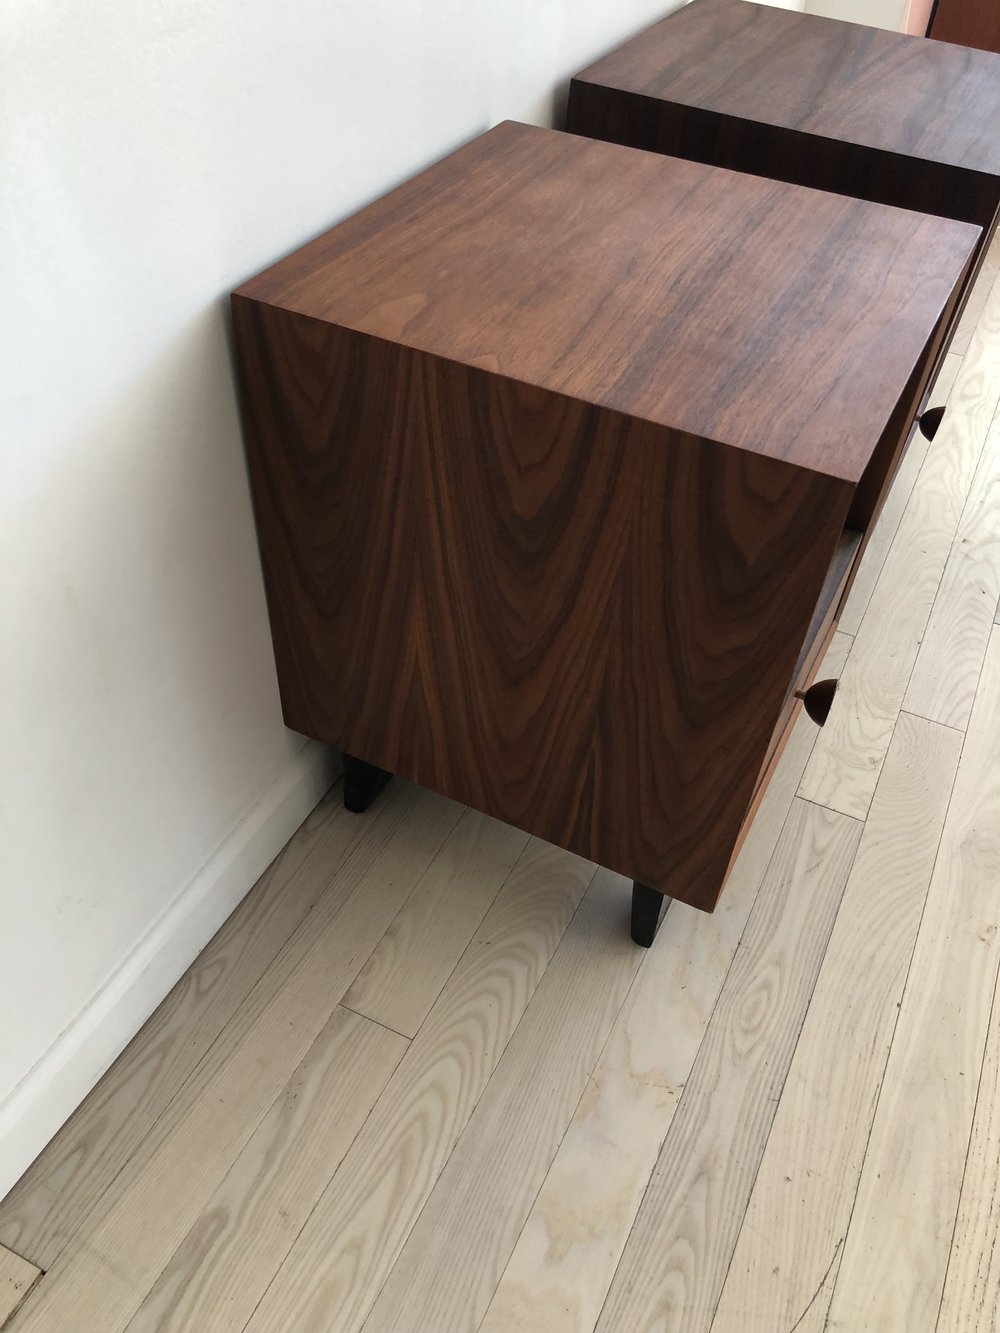 1950s Walnut George Nelson for Herman Miller Pair of Nightstands